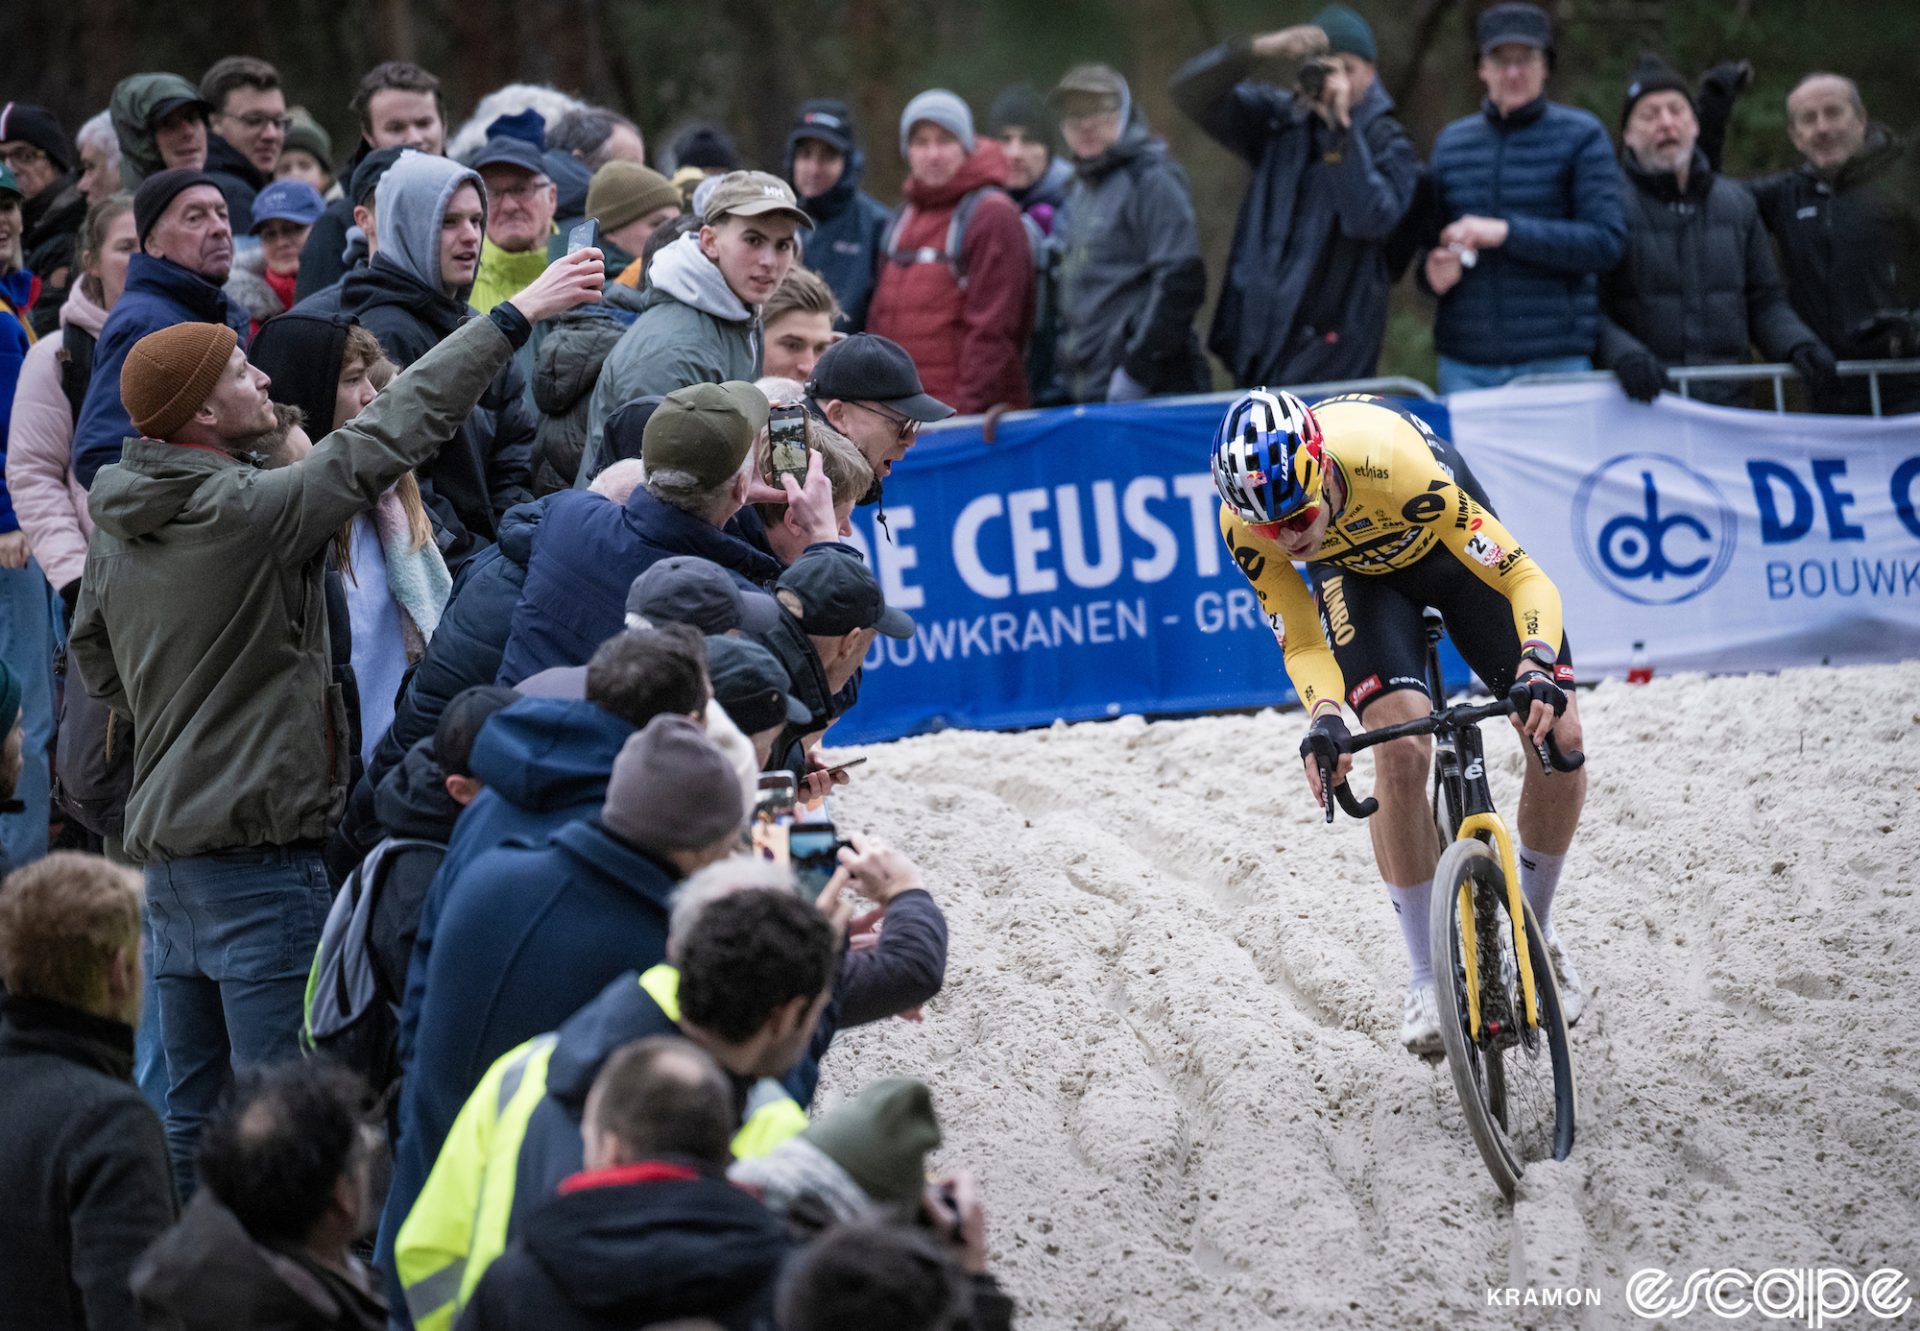 Van Aert fights to keep his bike upright and moving forward in the sand. He's leaning to his right to countersteer the bike as the front wheel slides.